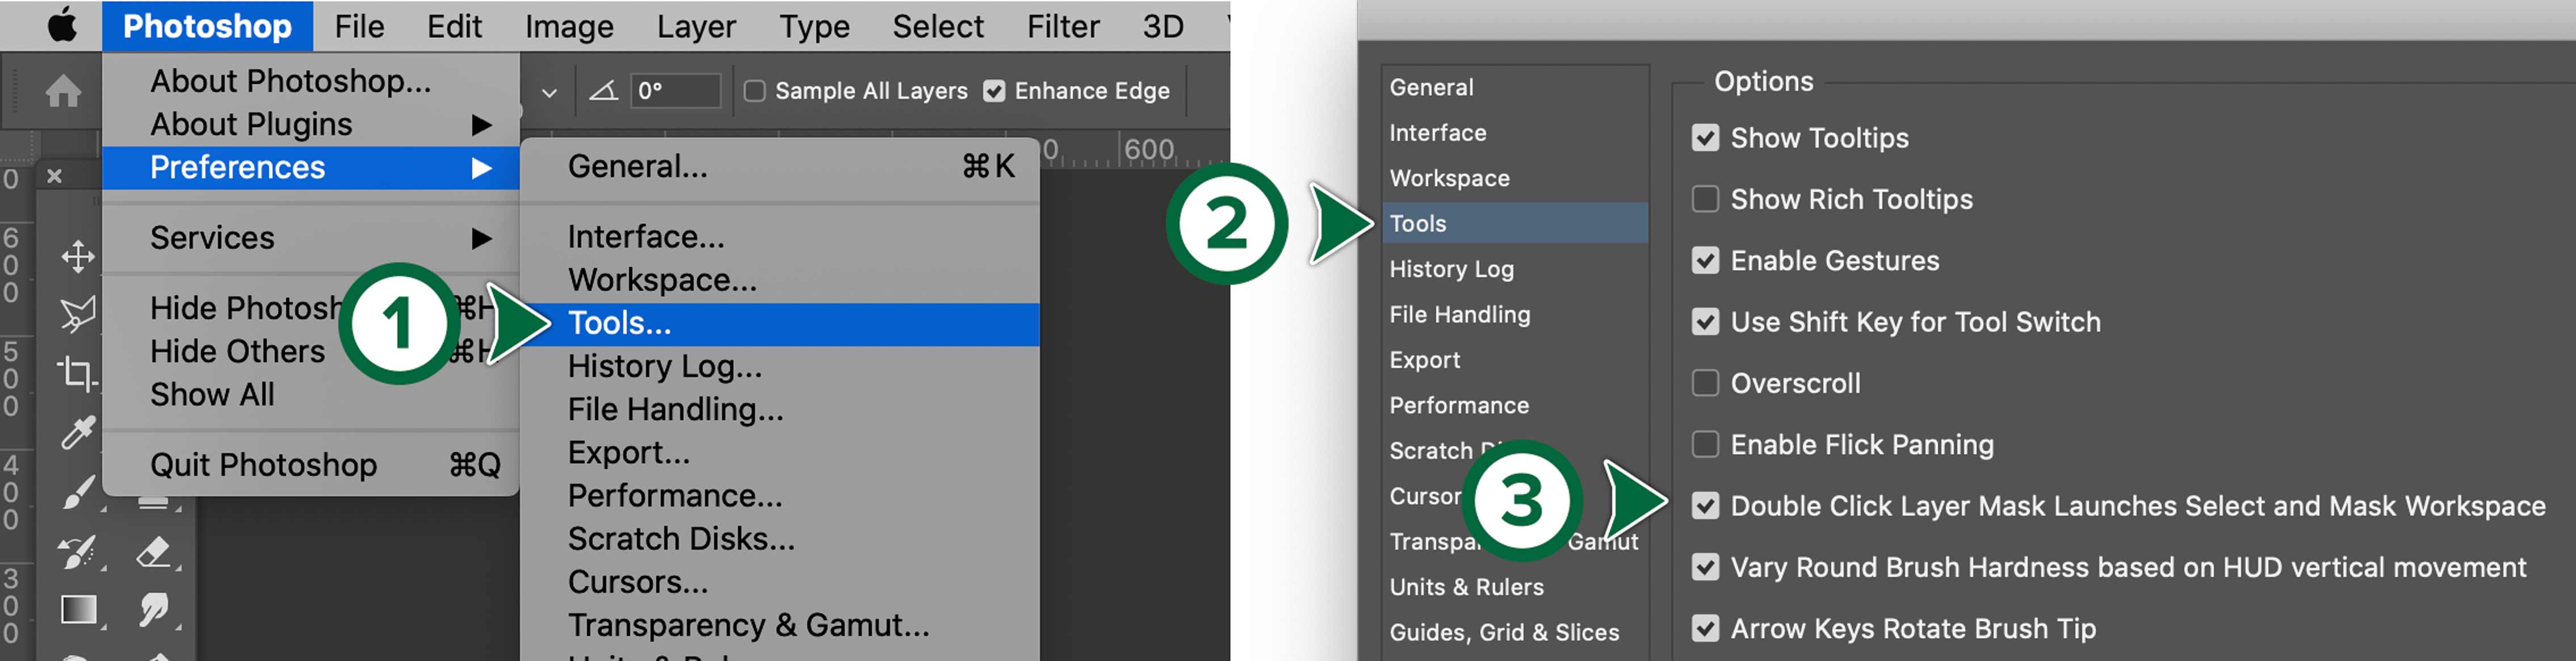 photoshop-double-click-select-and-mask